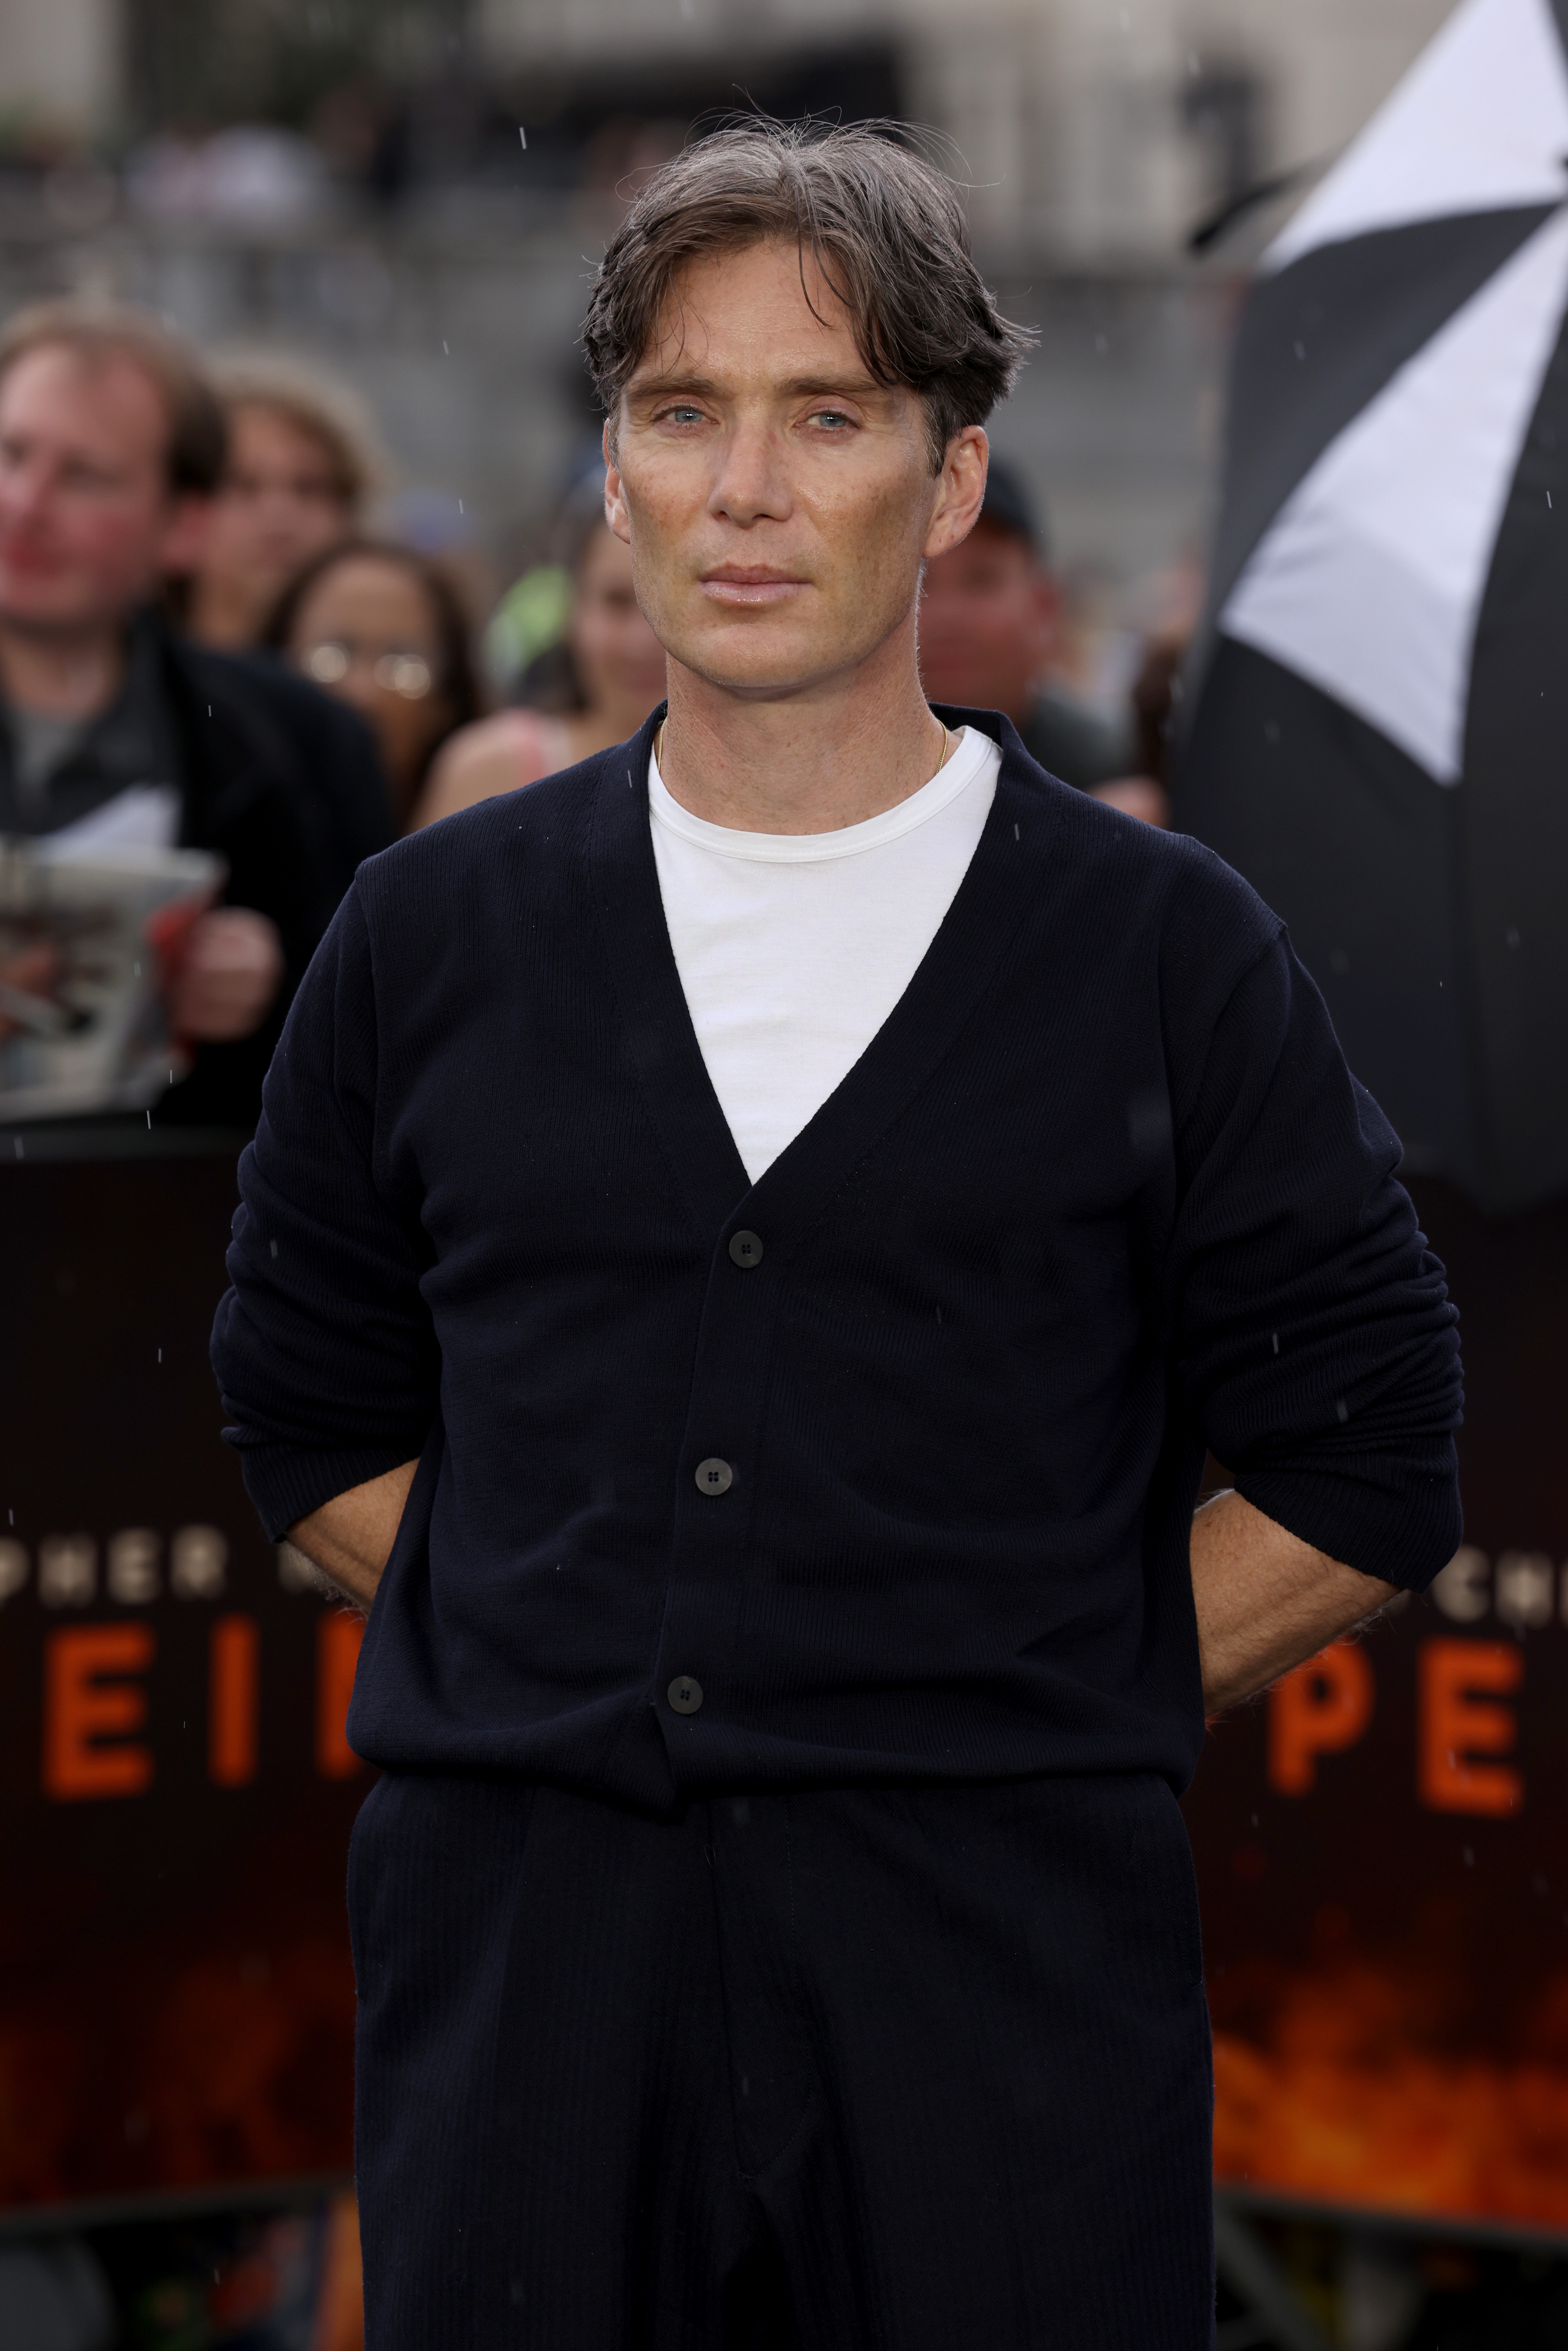 Cillian Murphy attends the London Photocall for Universal Pictures' "Oppenheimer" at Trafalgar Square in London, England, on July 12, 2023. | Source: Getty Images